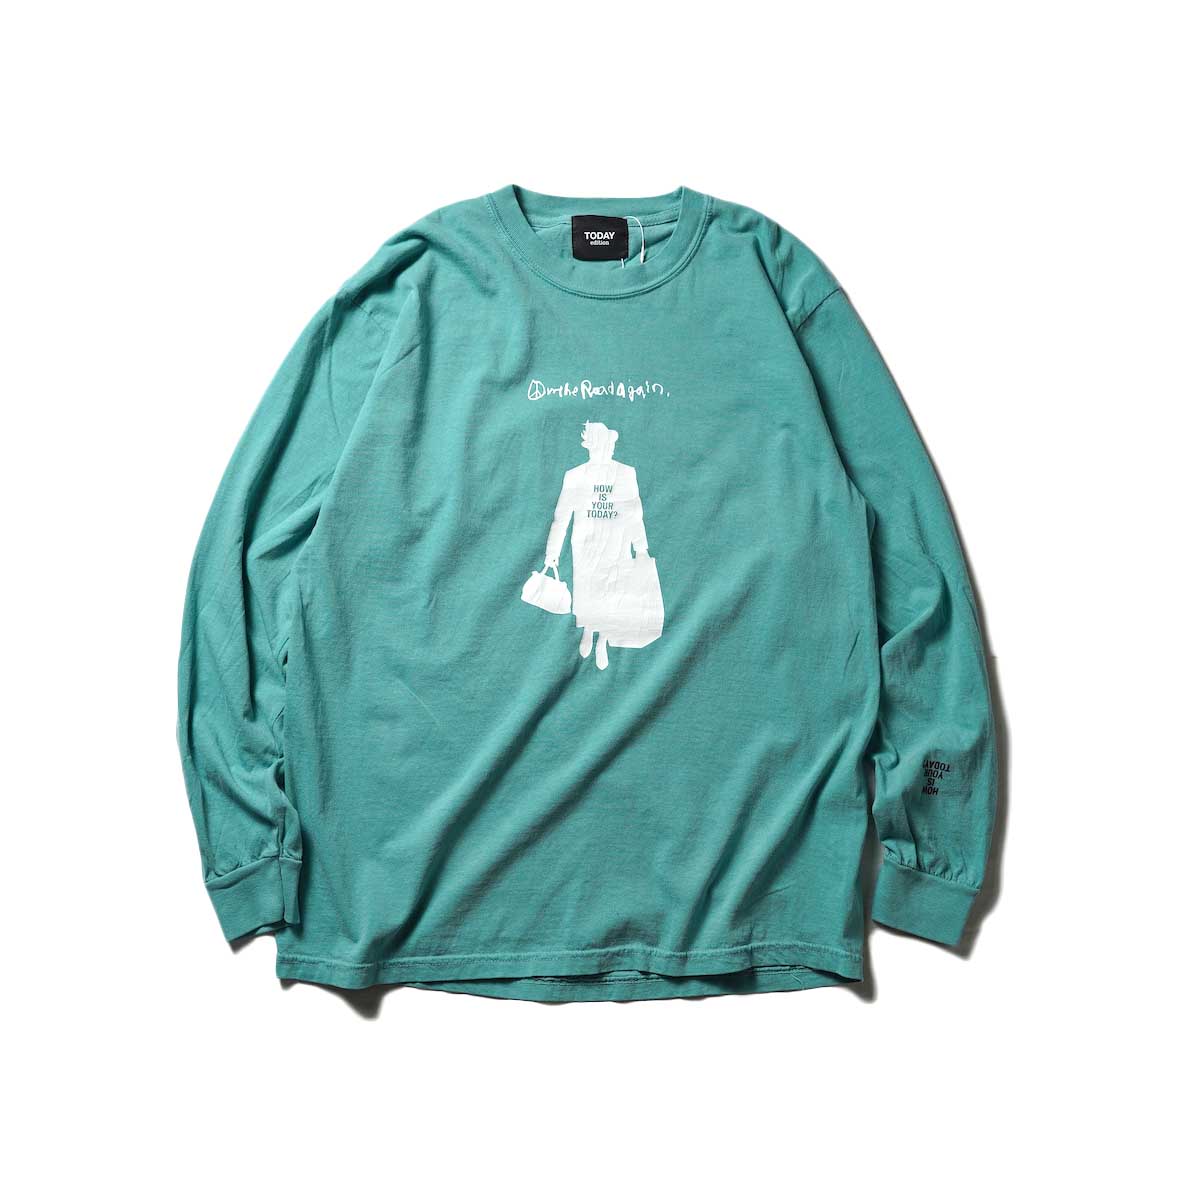 TODAY edition / Sllhouette #2 L/S Tee (Green)